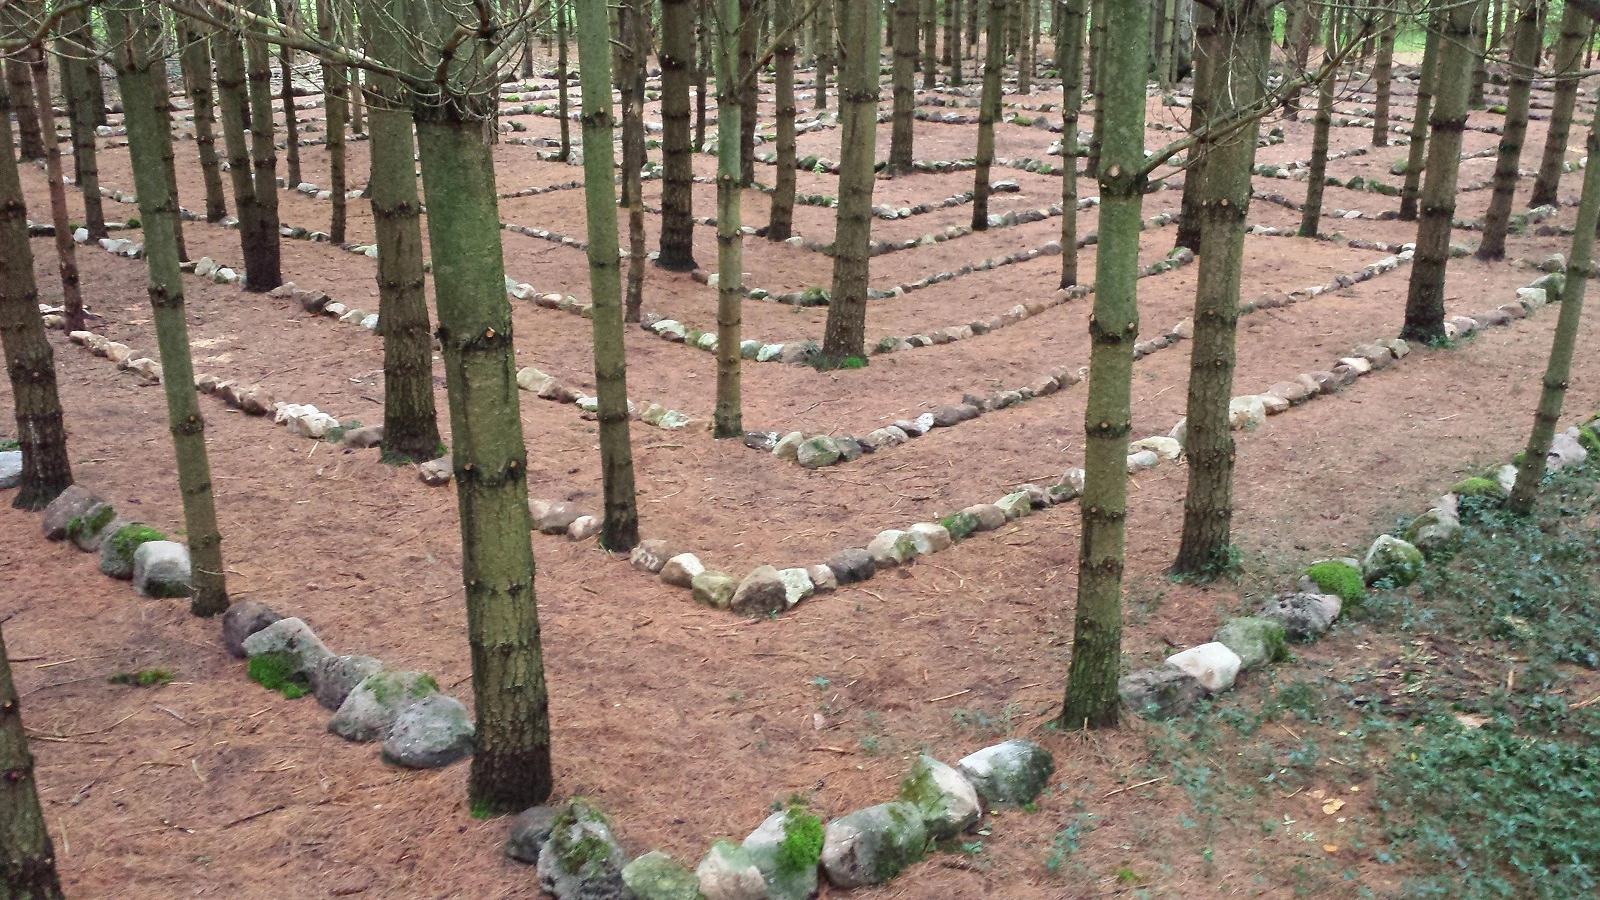 The Forest Labyrinth